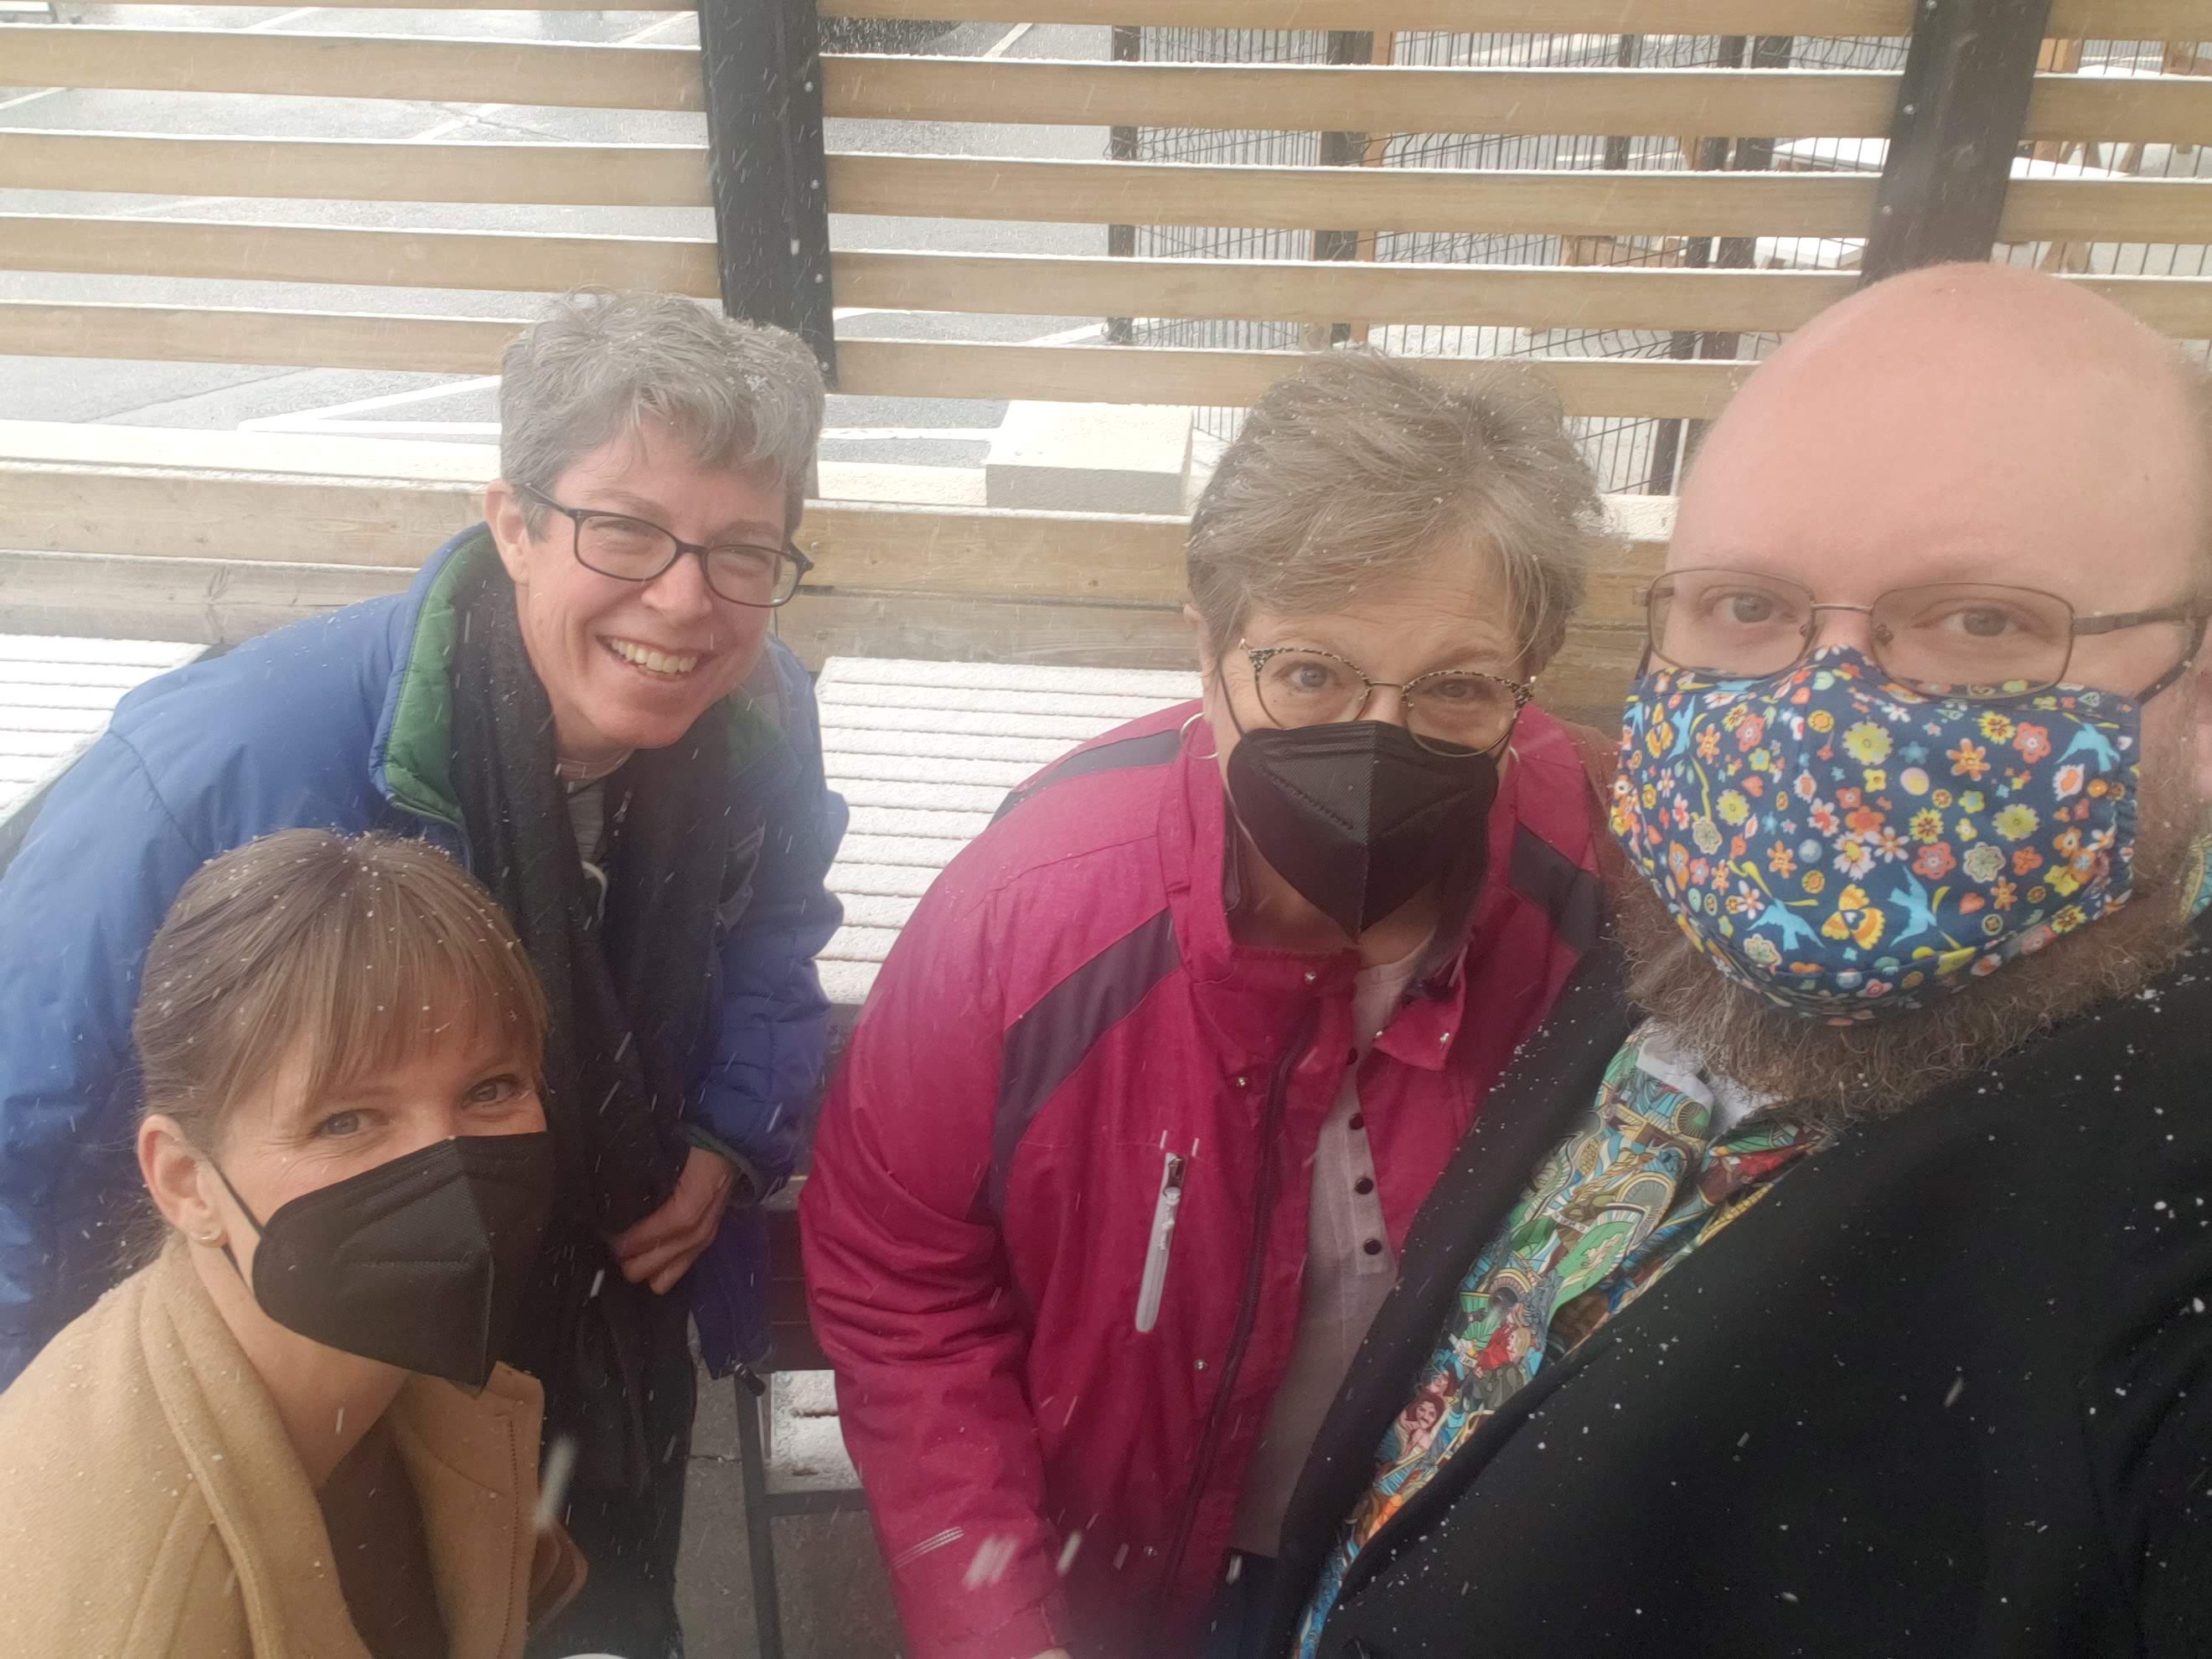 Dana Center professional learning specialists Jackie LeJeune, Lisa Brown, Mary Davis, and Michael Greenlee enjoying the New Mexico snow.